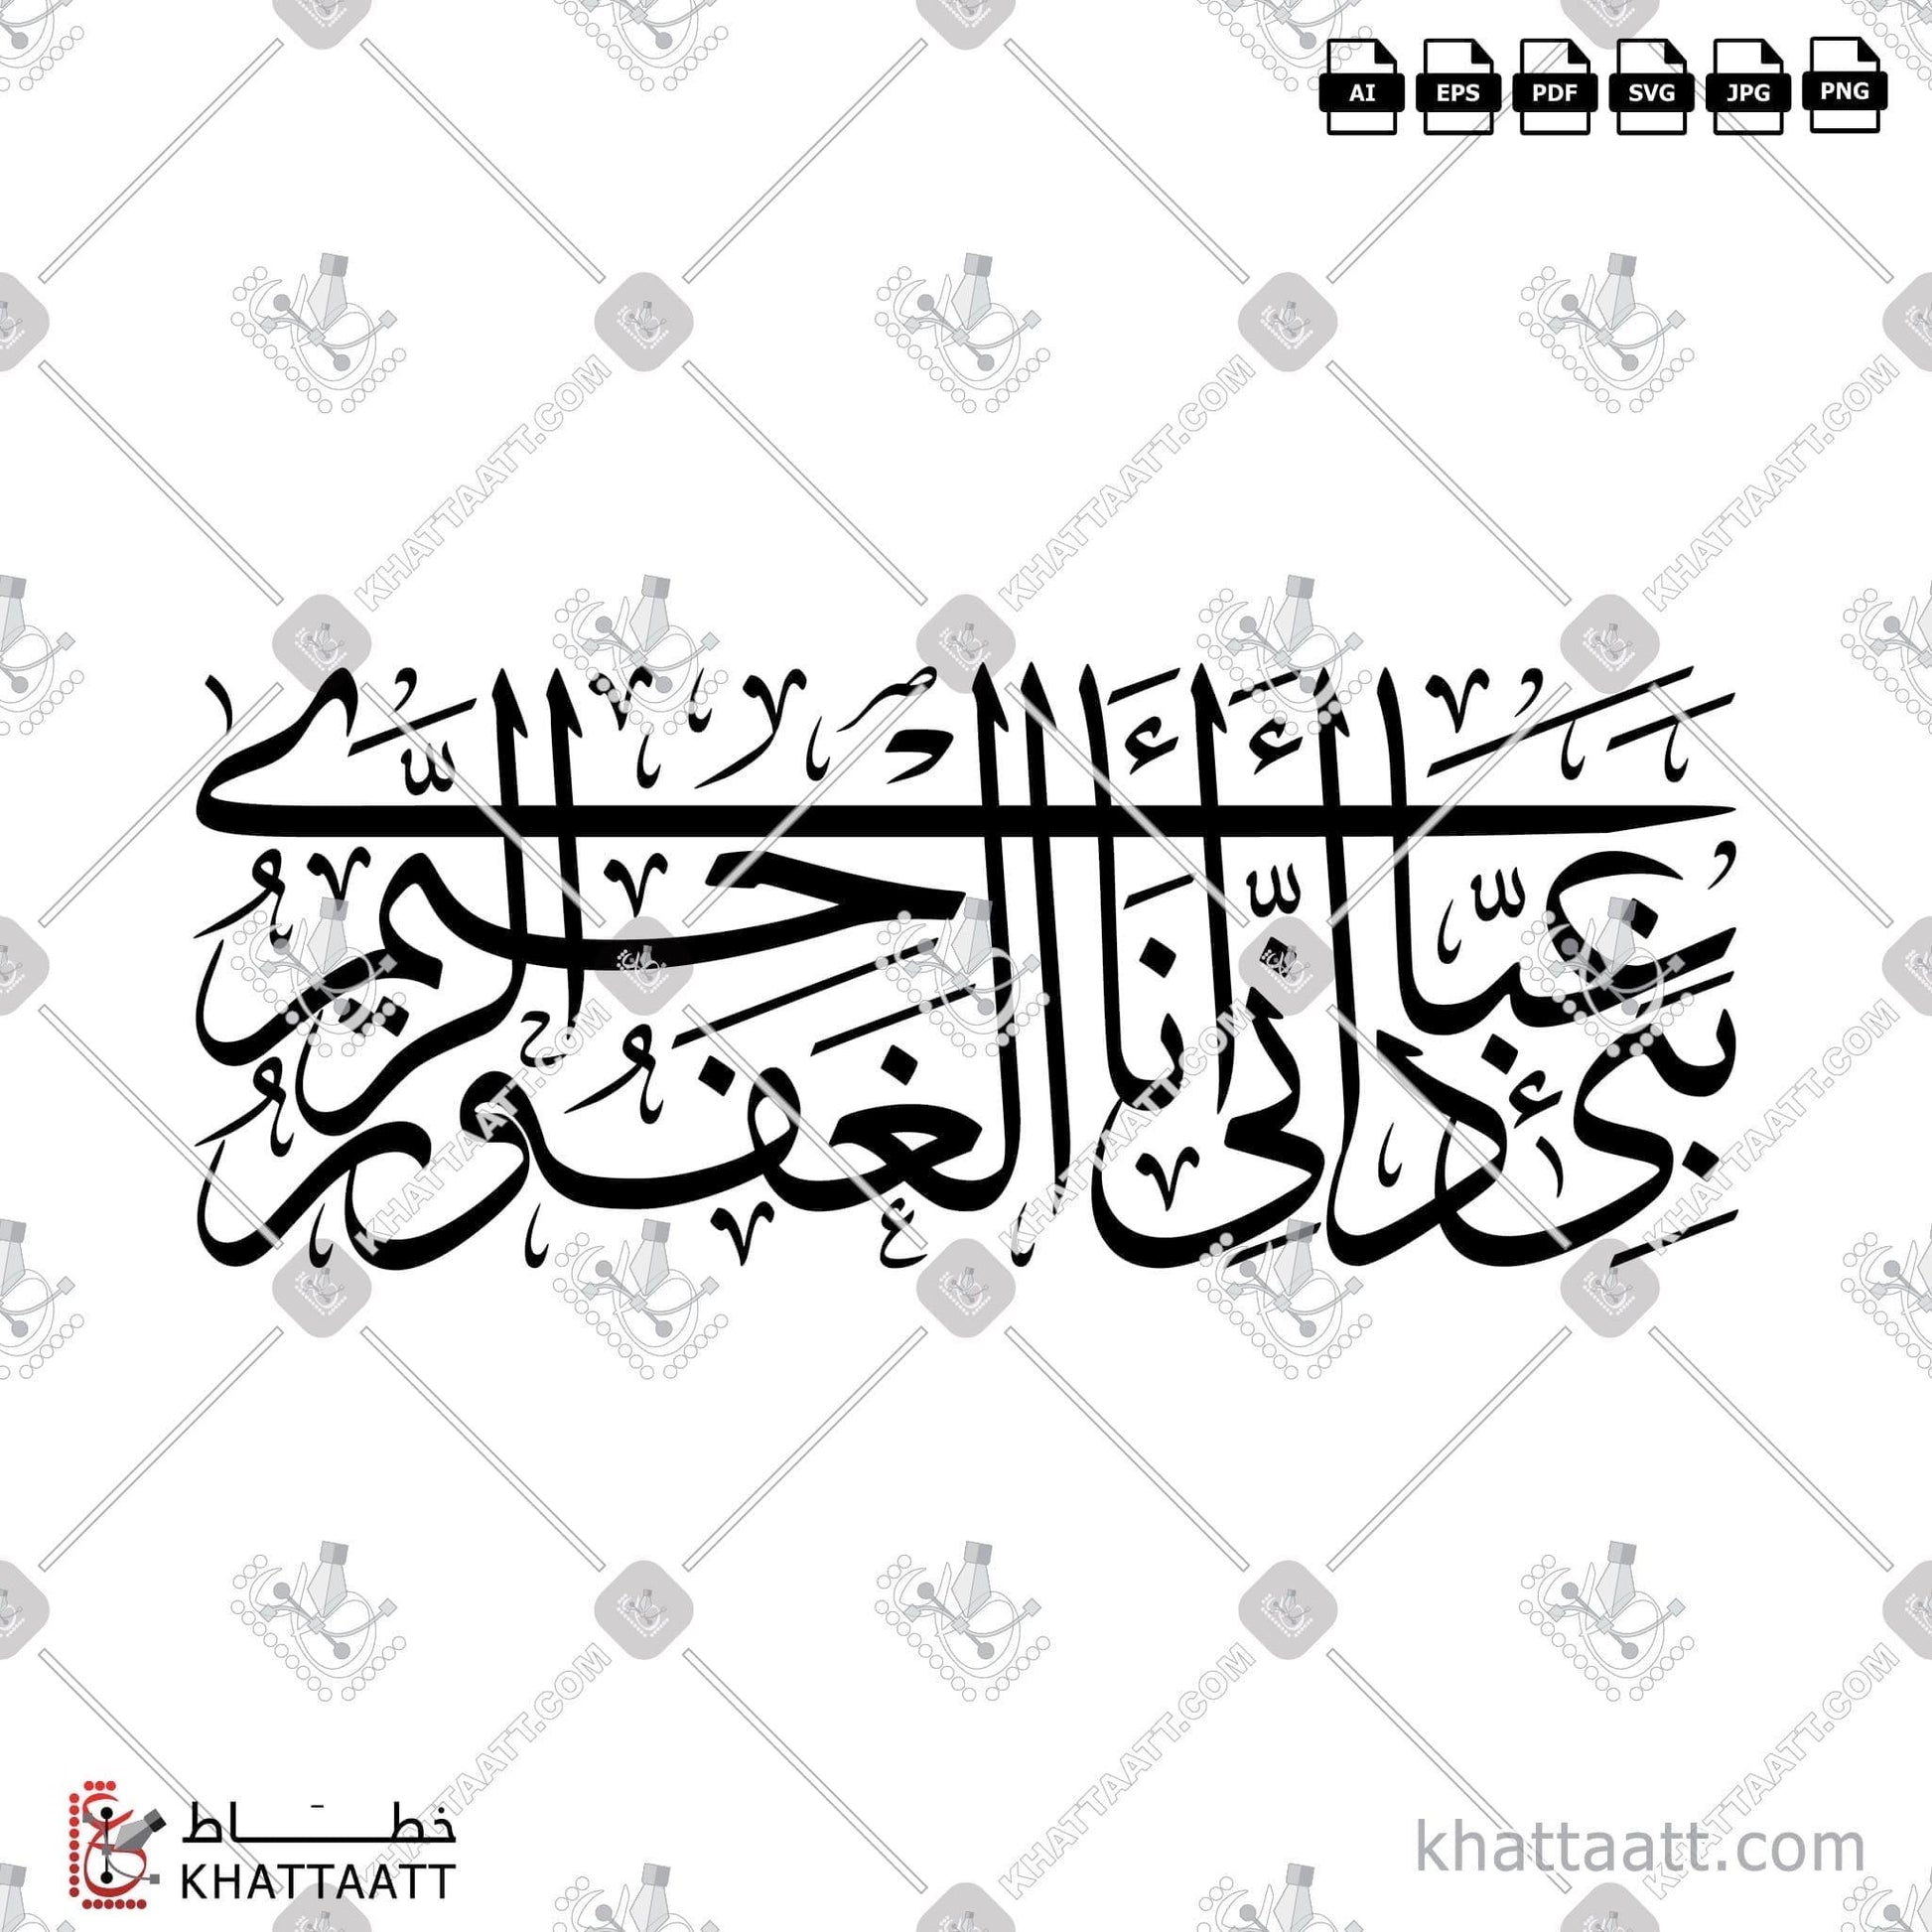 Download Arabic Calligraphy of نبئ عبادي أني أنا الغفور الرحيم in Thuluth - خط الثلث in vector and .png